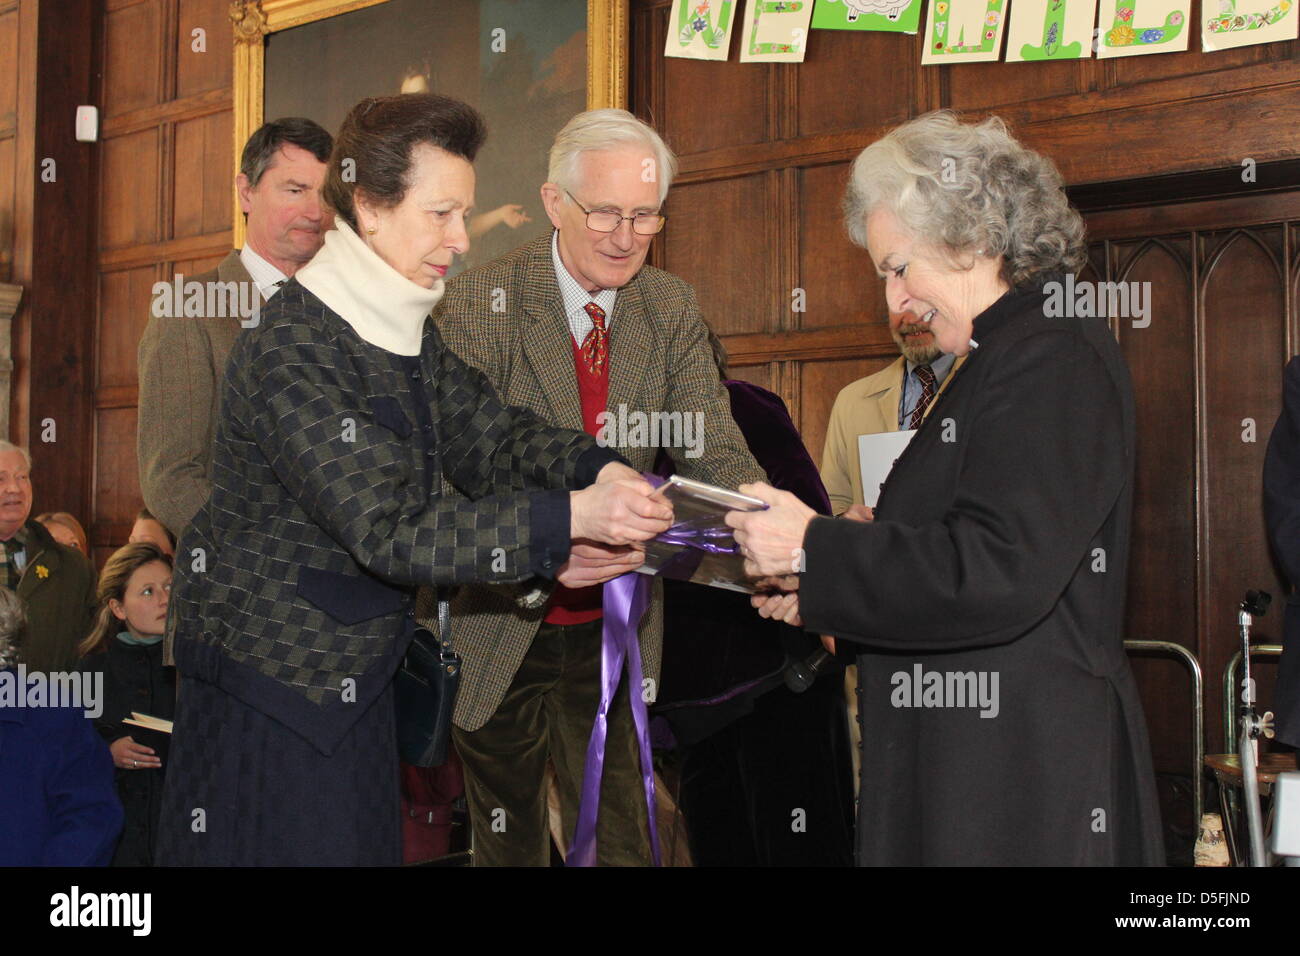 Avening, near Cirencester, Gloucestershire, UK. 31st March 2013.  The Princess Royal Presents a retirement gift to the Rev Celia Carter MBE, at Avening Court, Avening, near Cirencester. Rev Celia has been Priest in charge at Avening since 1984, and was among the first women in England to be pristed - she was awarded an MBE by the Princess Royal in 2012. The Princess Royal is accompanied by her husband Sir Timothy Laurence. The Princess was very relaxed, and after attending the service, took time to mingle and chat with villagers Credit: Antony Slater / Alamy Live News Stock Photo